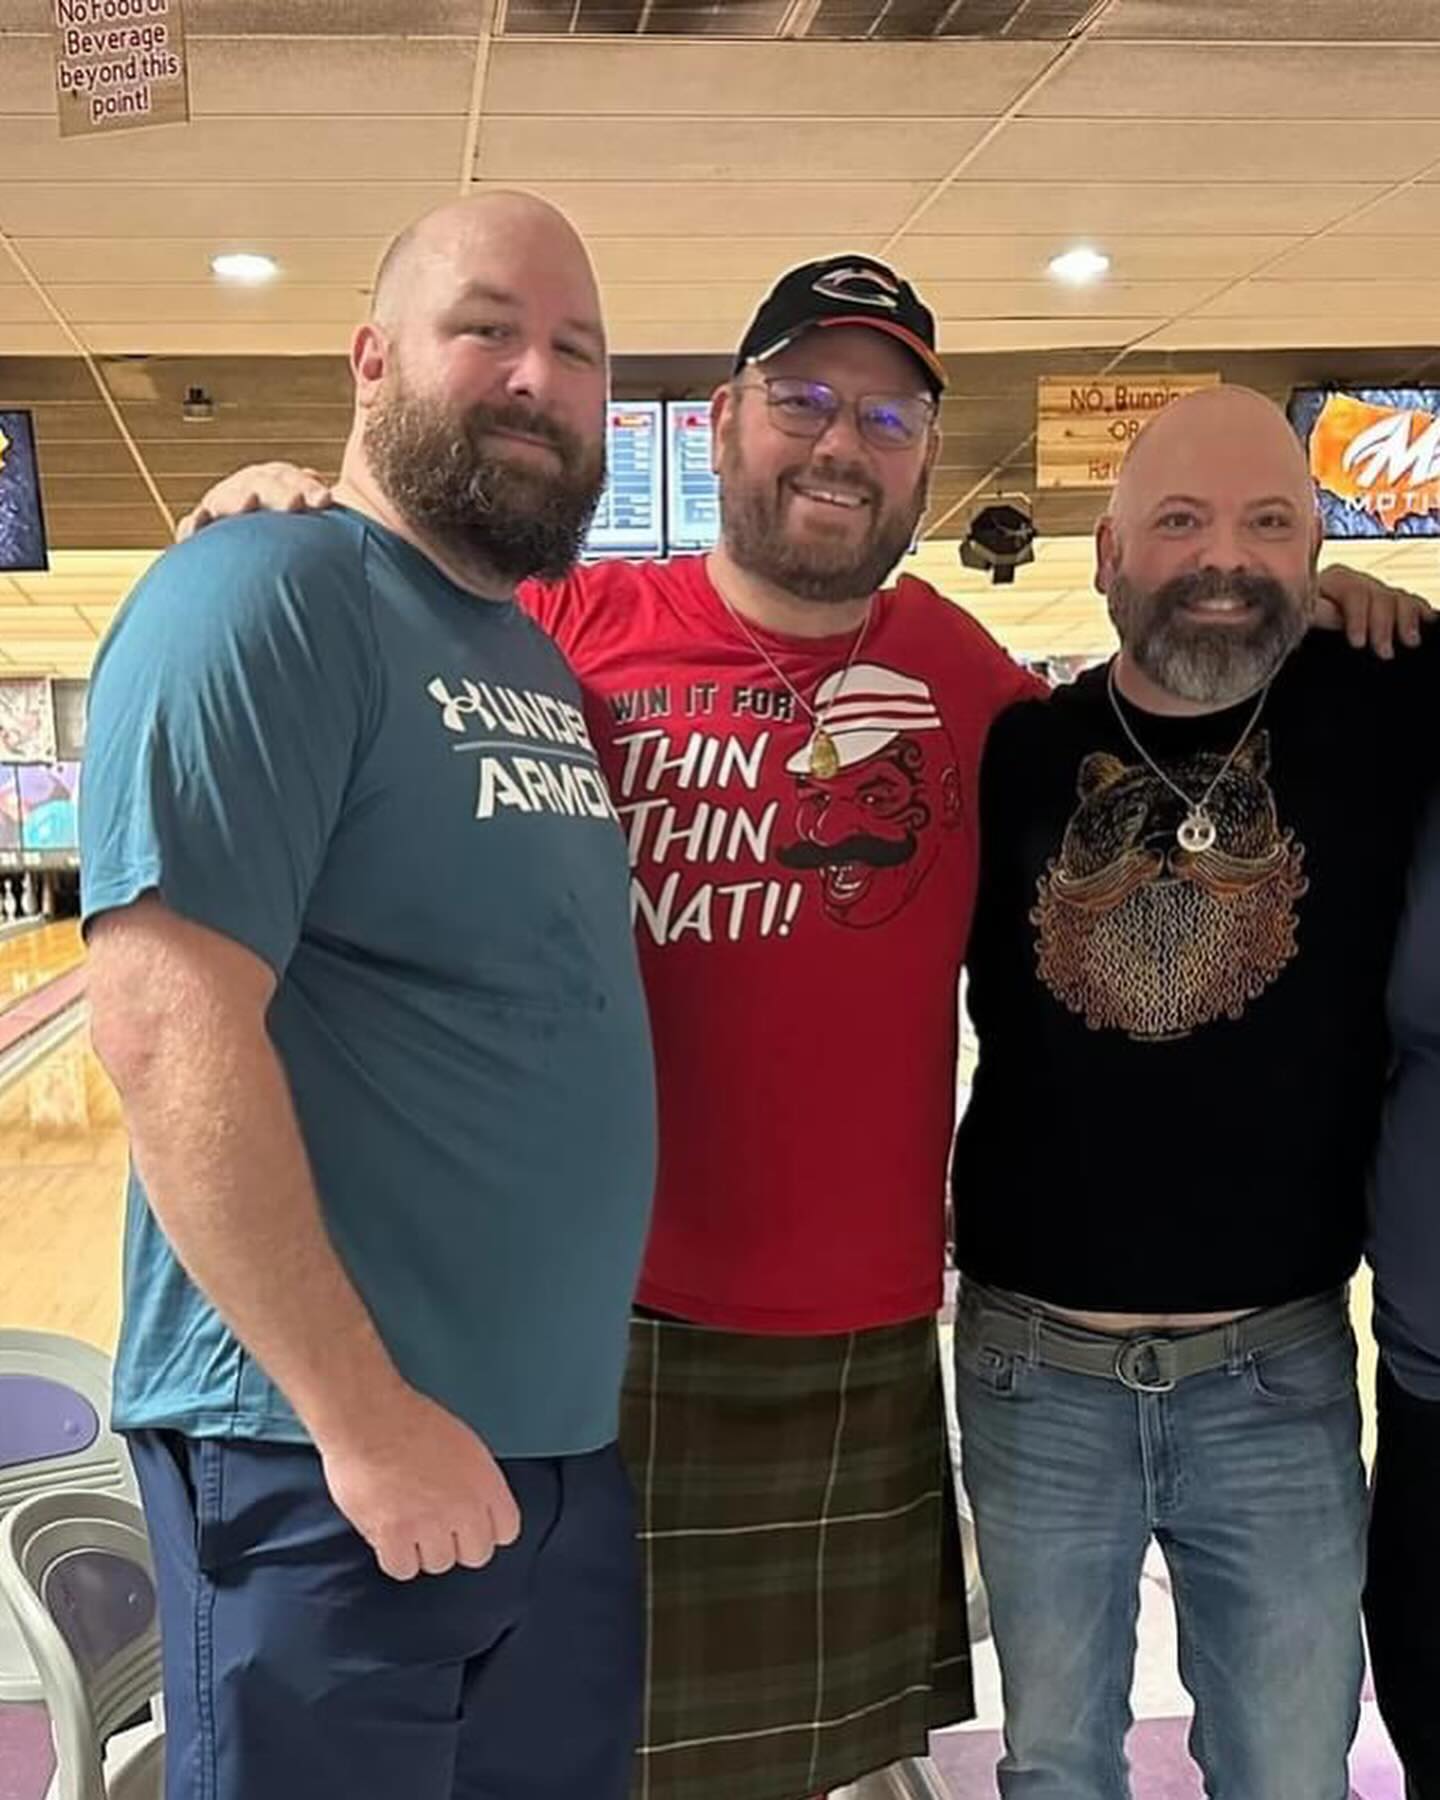 End of the 2023/2024 @igbobowling season. Had a great time seeing old friends and making new ones. Can’t wait for the few tournaments I have this summer. 
#bearlove #bearstagram #hairyscruffhomo #hairyscruff #stockybears #beardedhomo #hairybearlife #hairybeardedcub #gaybear #gaybearded #gaycub #beardedgay #instagay #gay #bearsofinstagram #cubsofinstagram #hairychest #gaysofinstagram #scruff #bear #hairy #fur